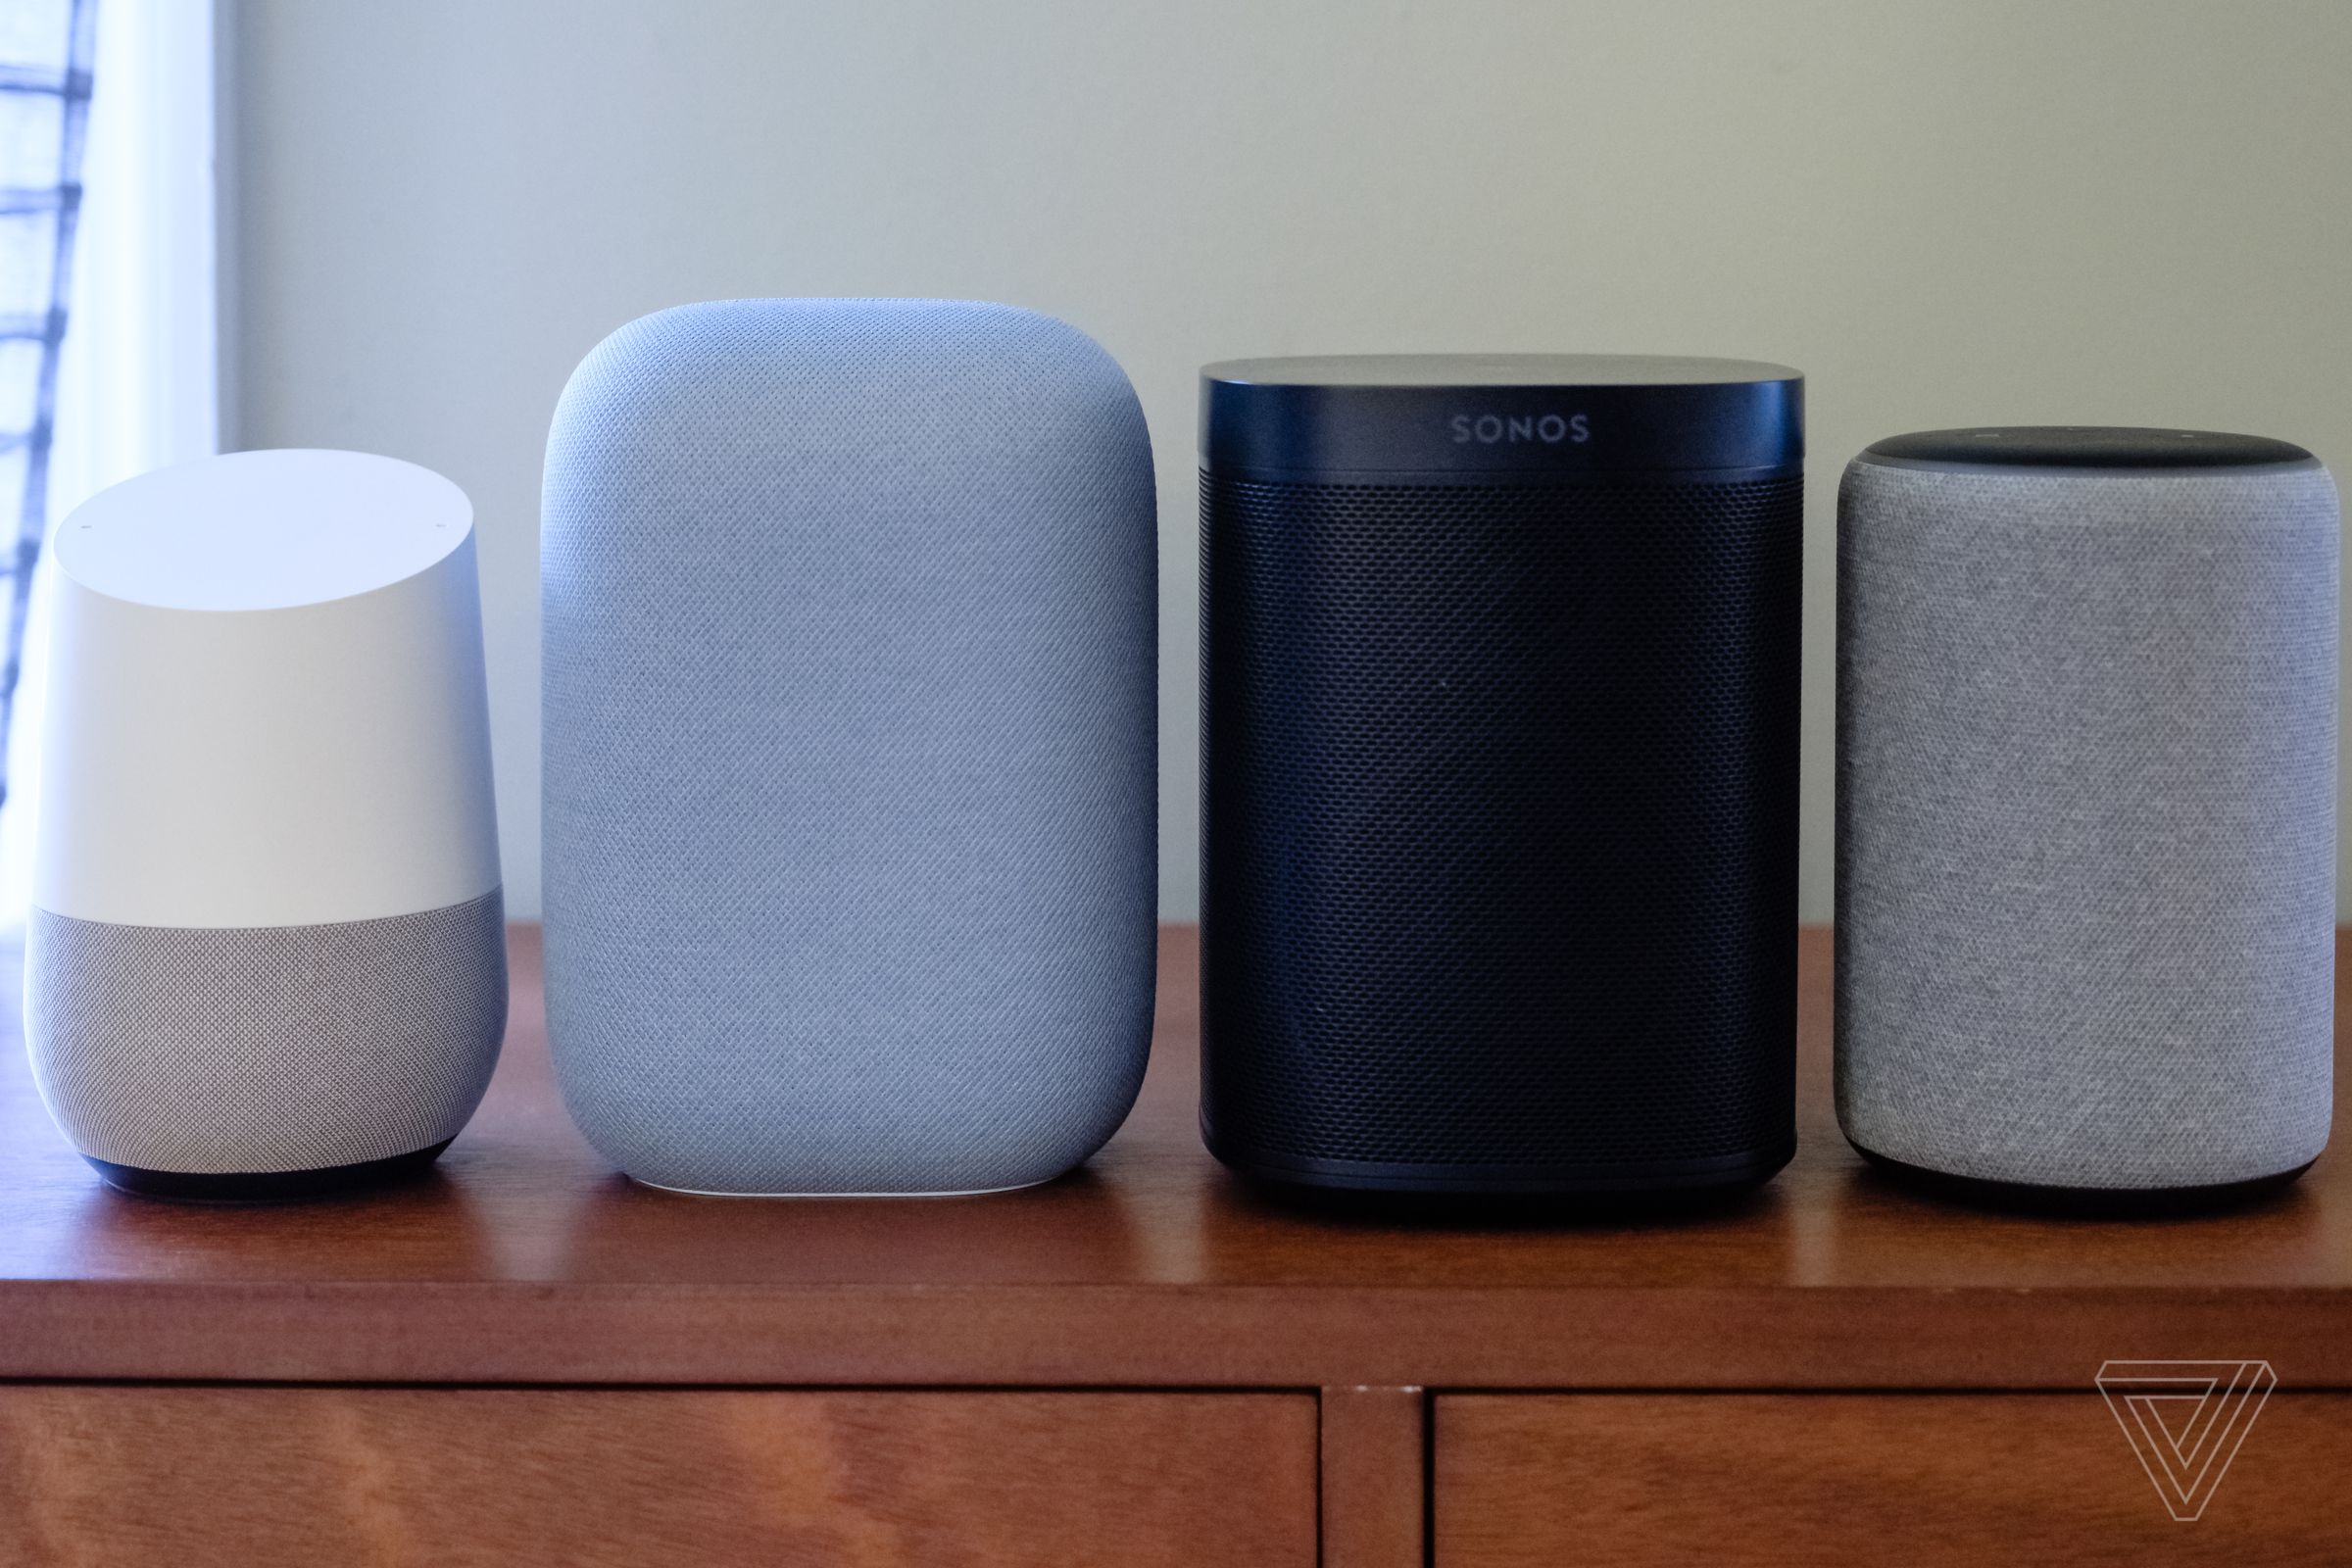 The Nest Audio (second from left) is taller than the original Google Home (left) but about the same height as the Sonos One (second from right) and 2019 Amazon Echo (right).